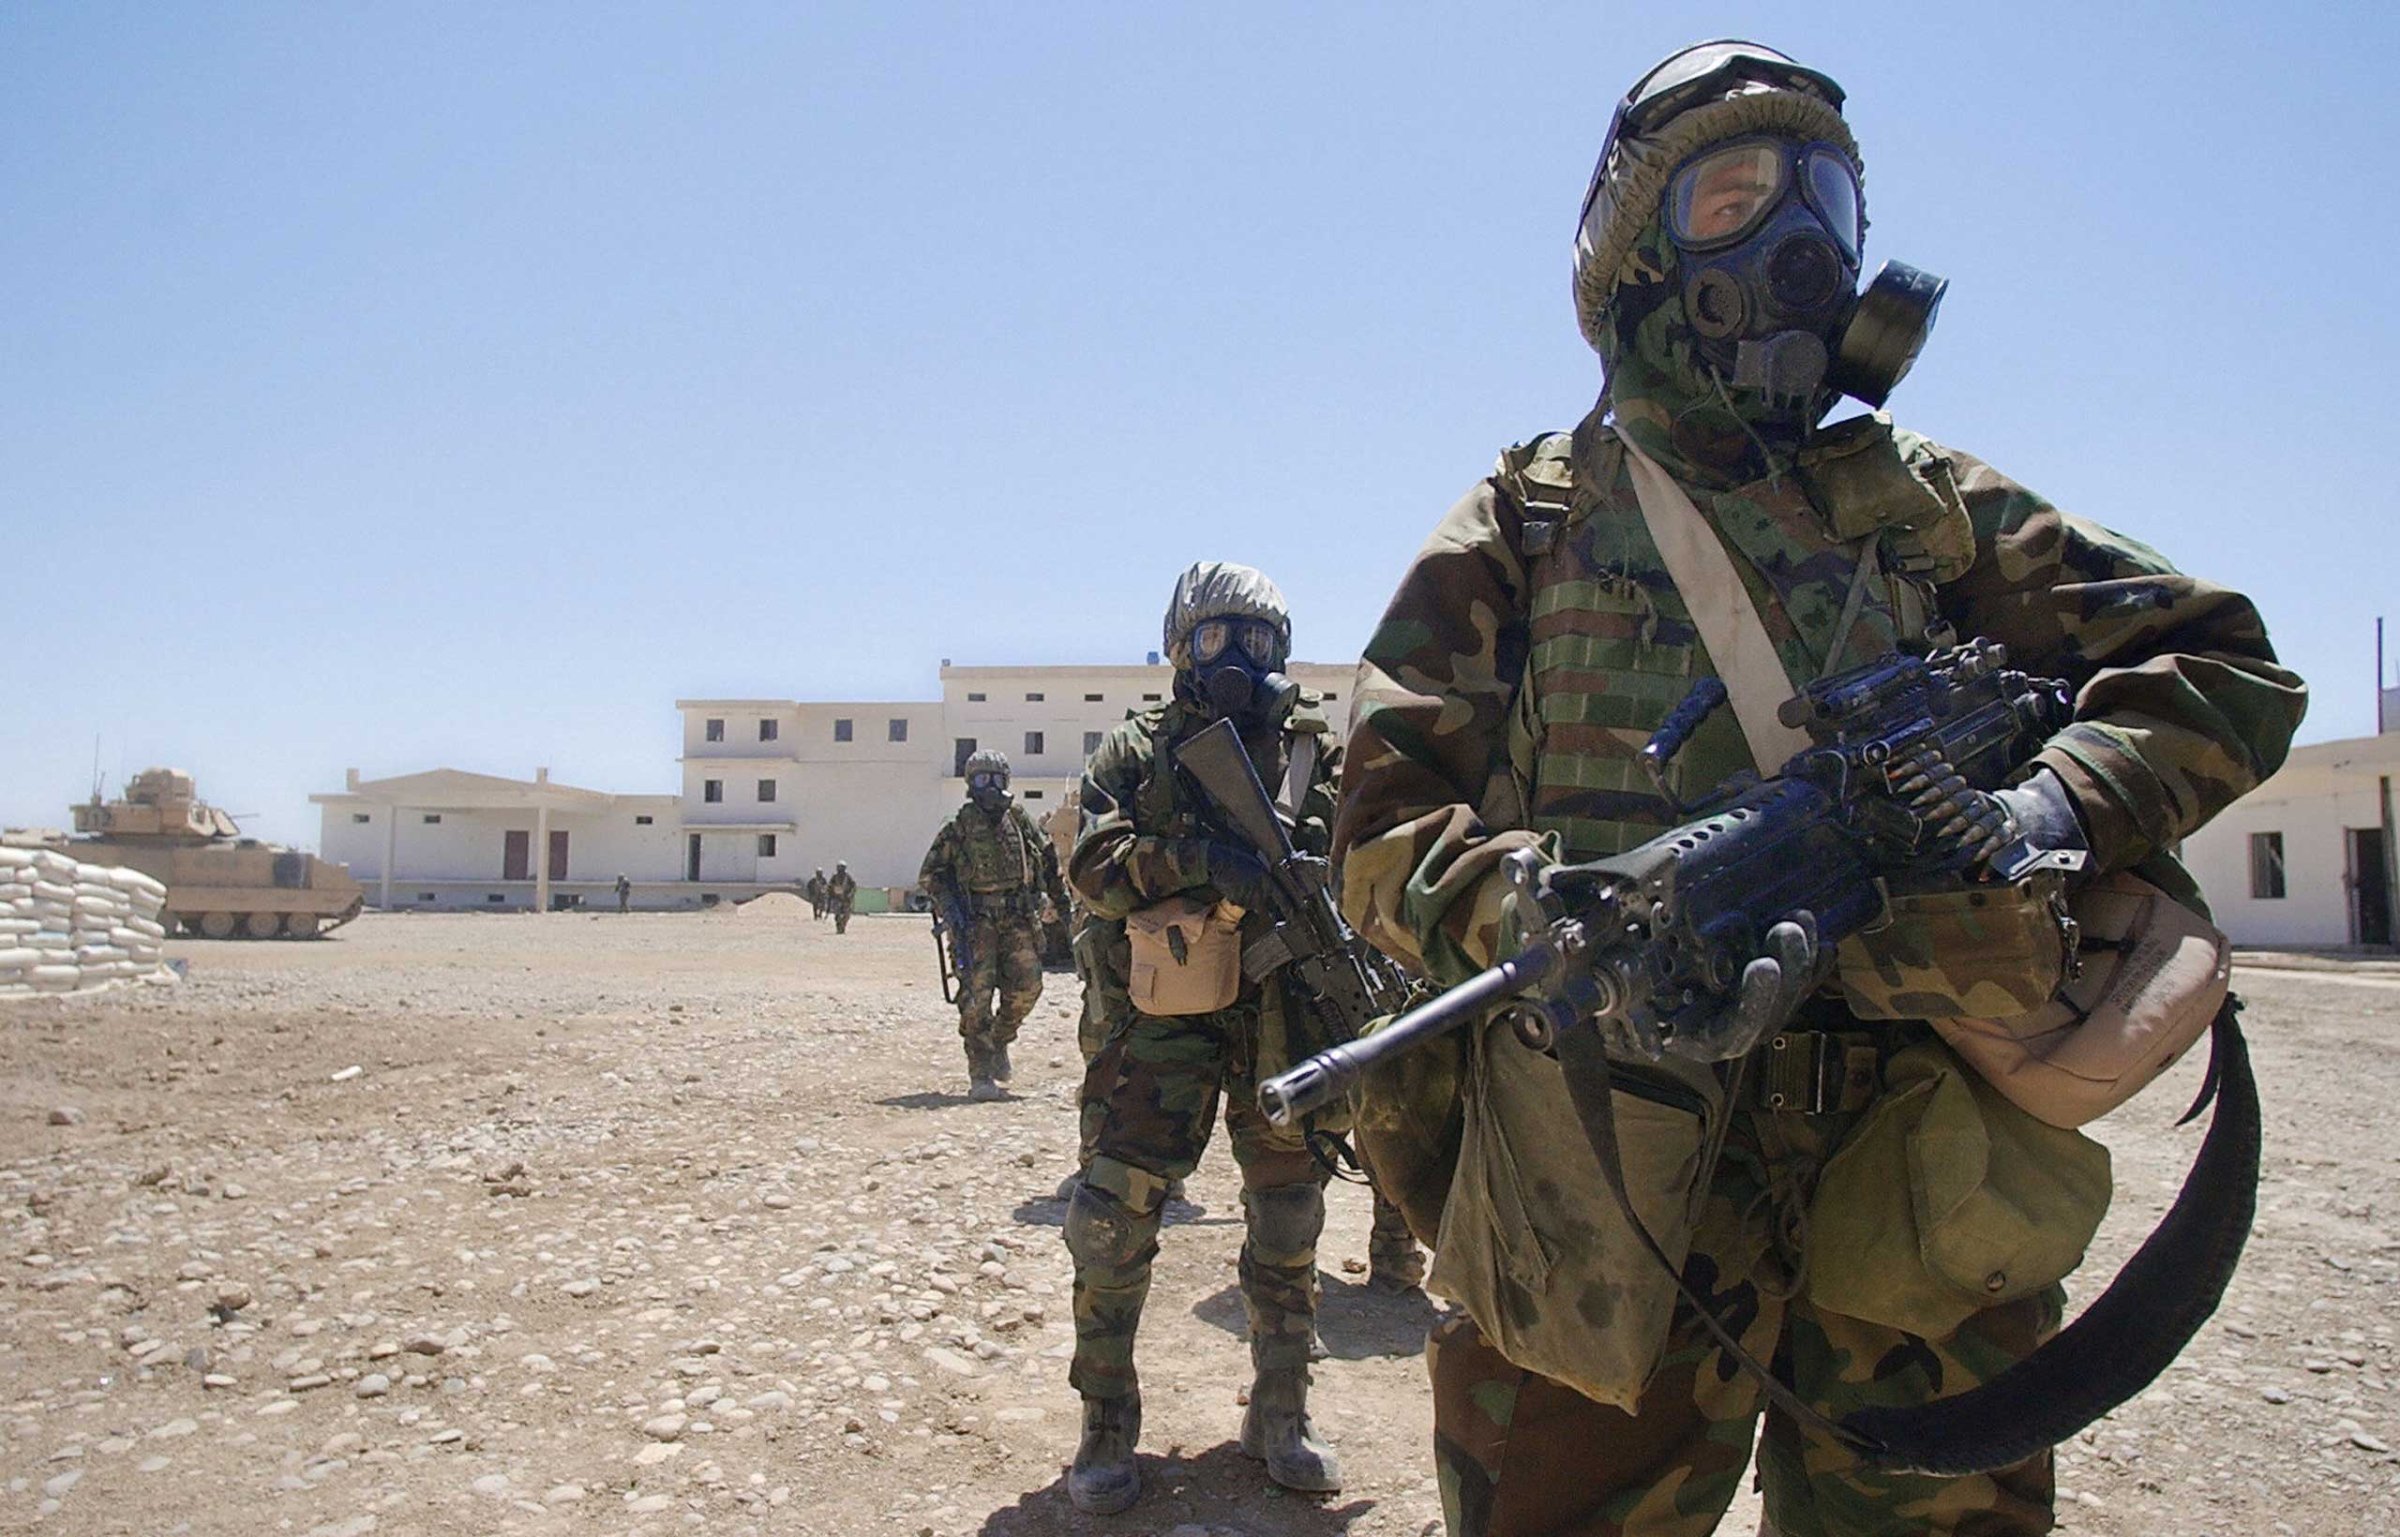 US Army soldiers wearing their full chemical protection suits walk inside the courtyard of an industrial complex they secured which they thought was a possible site for weapons of mass destruction in the central Iraqi town of Baquba in May 2003.